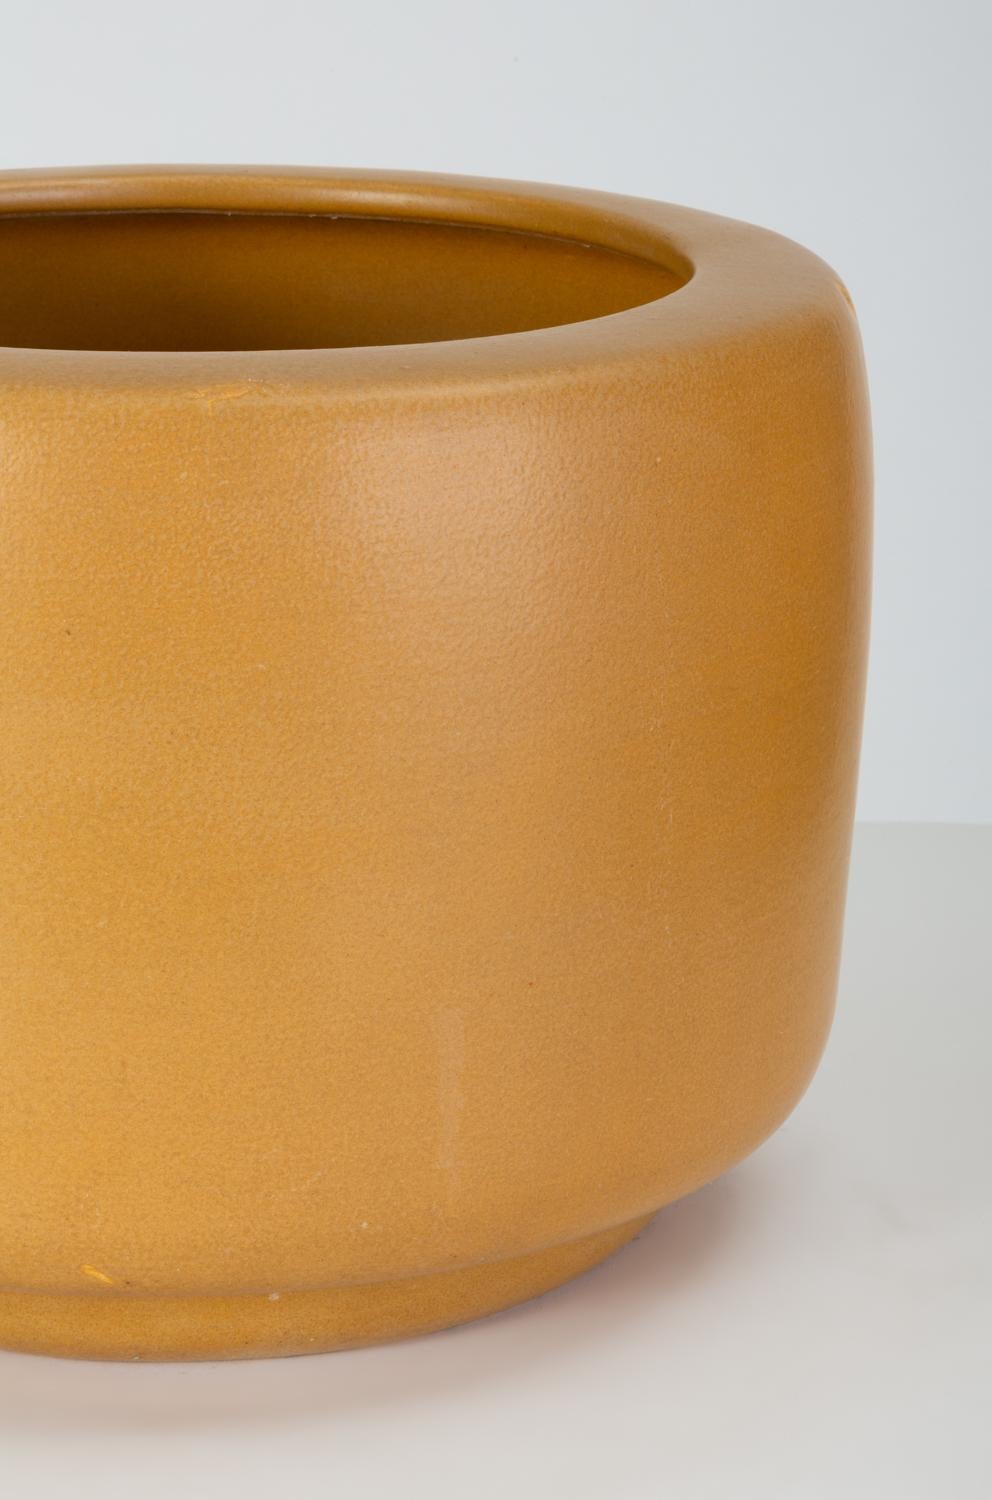 CP-13 Tire Planter by John Follis for Architectural Pottery in Yellow Glaze 1